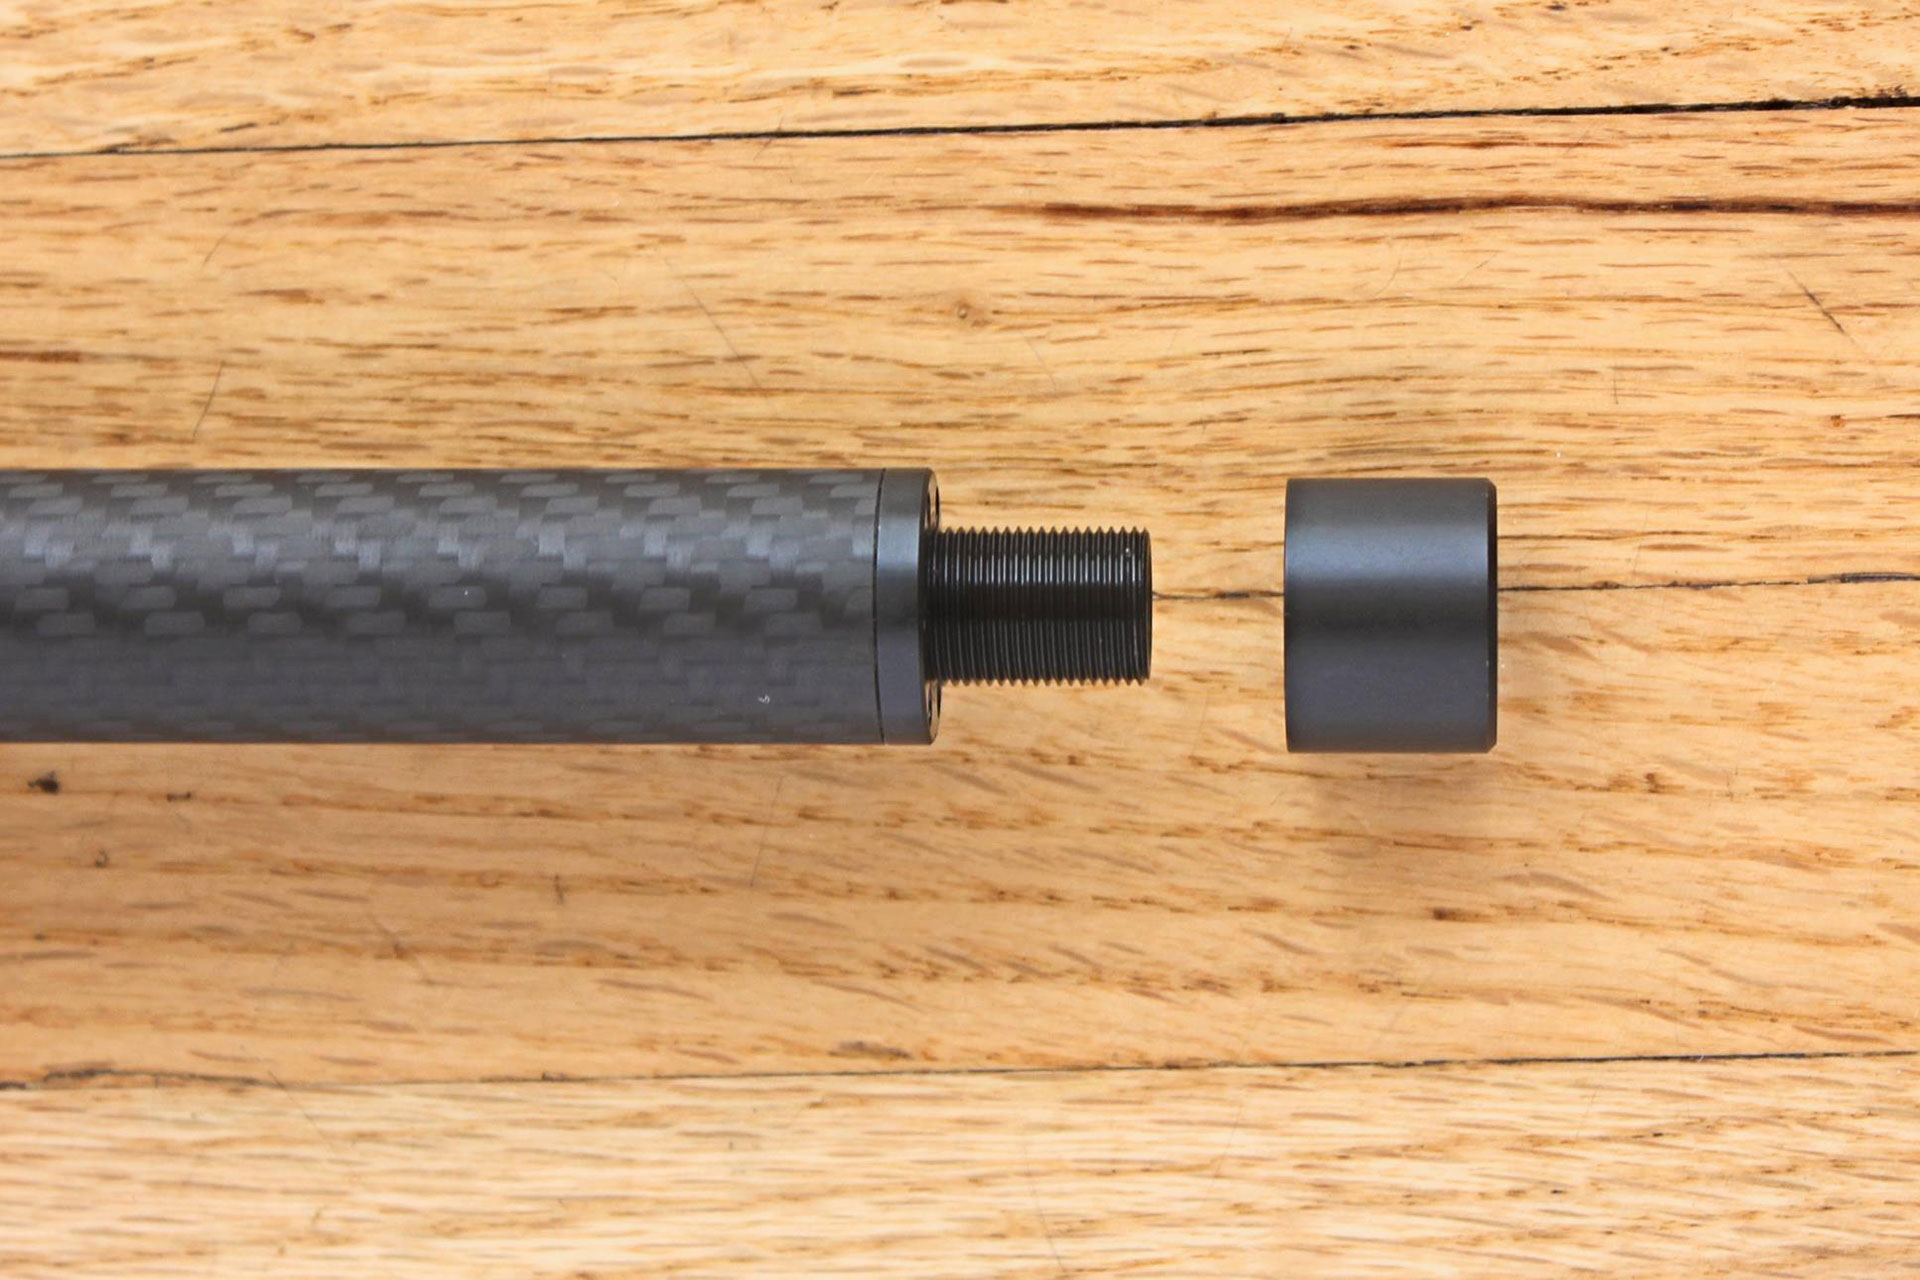 The tensioned carbon-fiber wrapped barrel’s threaded muzzle is fitted with a smooth aluminum thread protector.